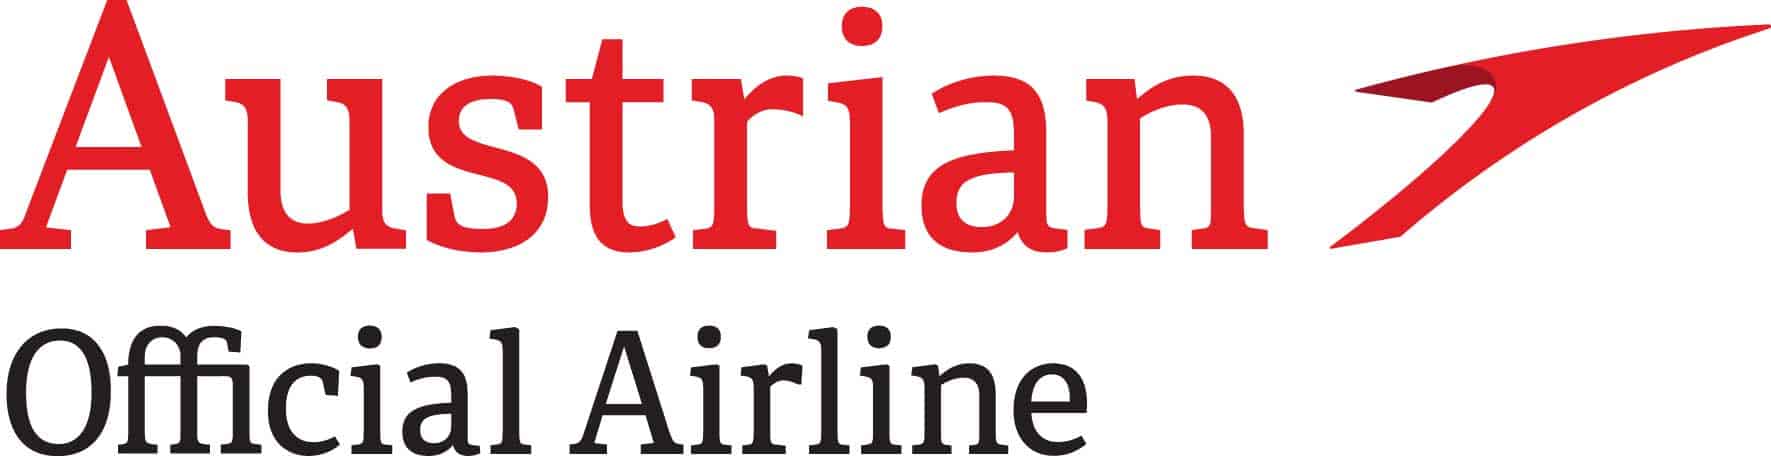 Austrian Airlines - Official Airline